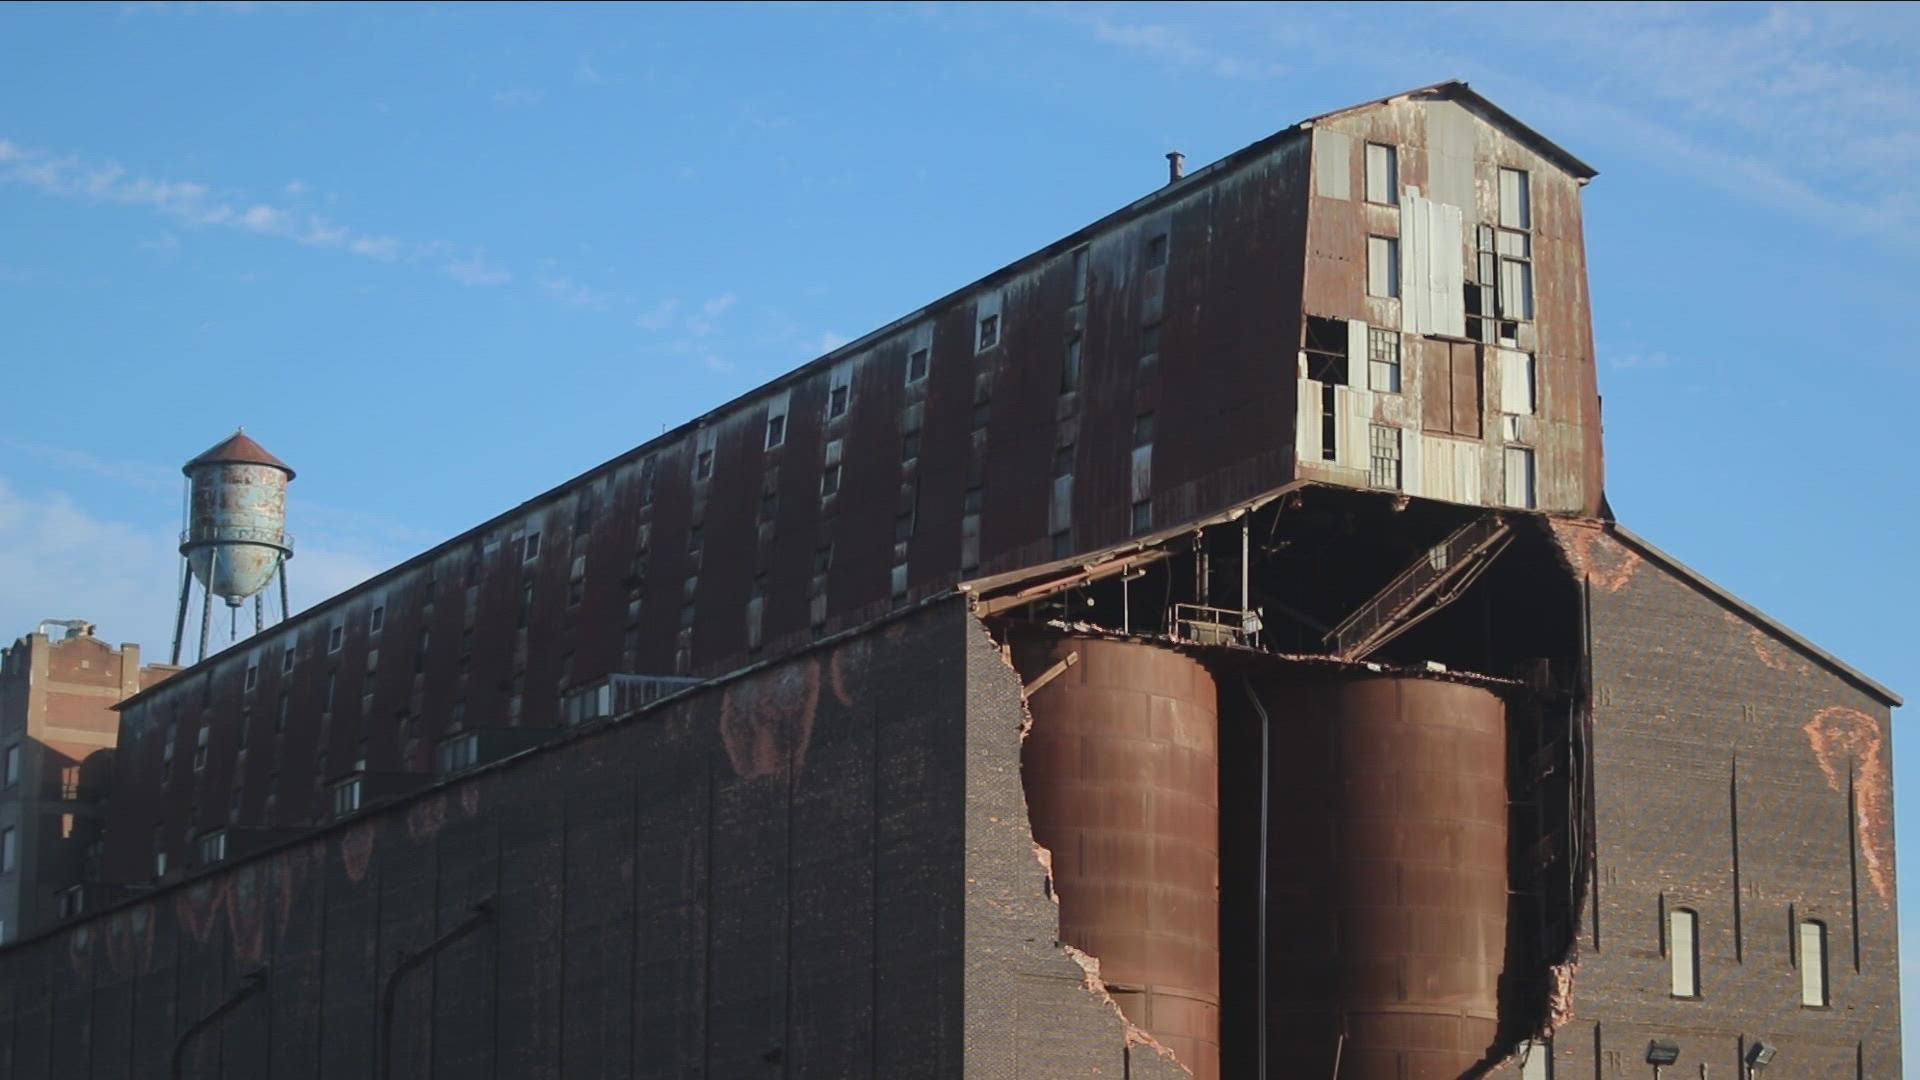 Further evidence that ADM is moving forward with plans to demolish the Great Northern Elevator, detailed plans have been filed with the city of Buffalo.